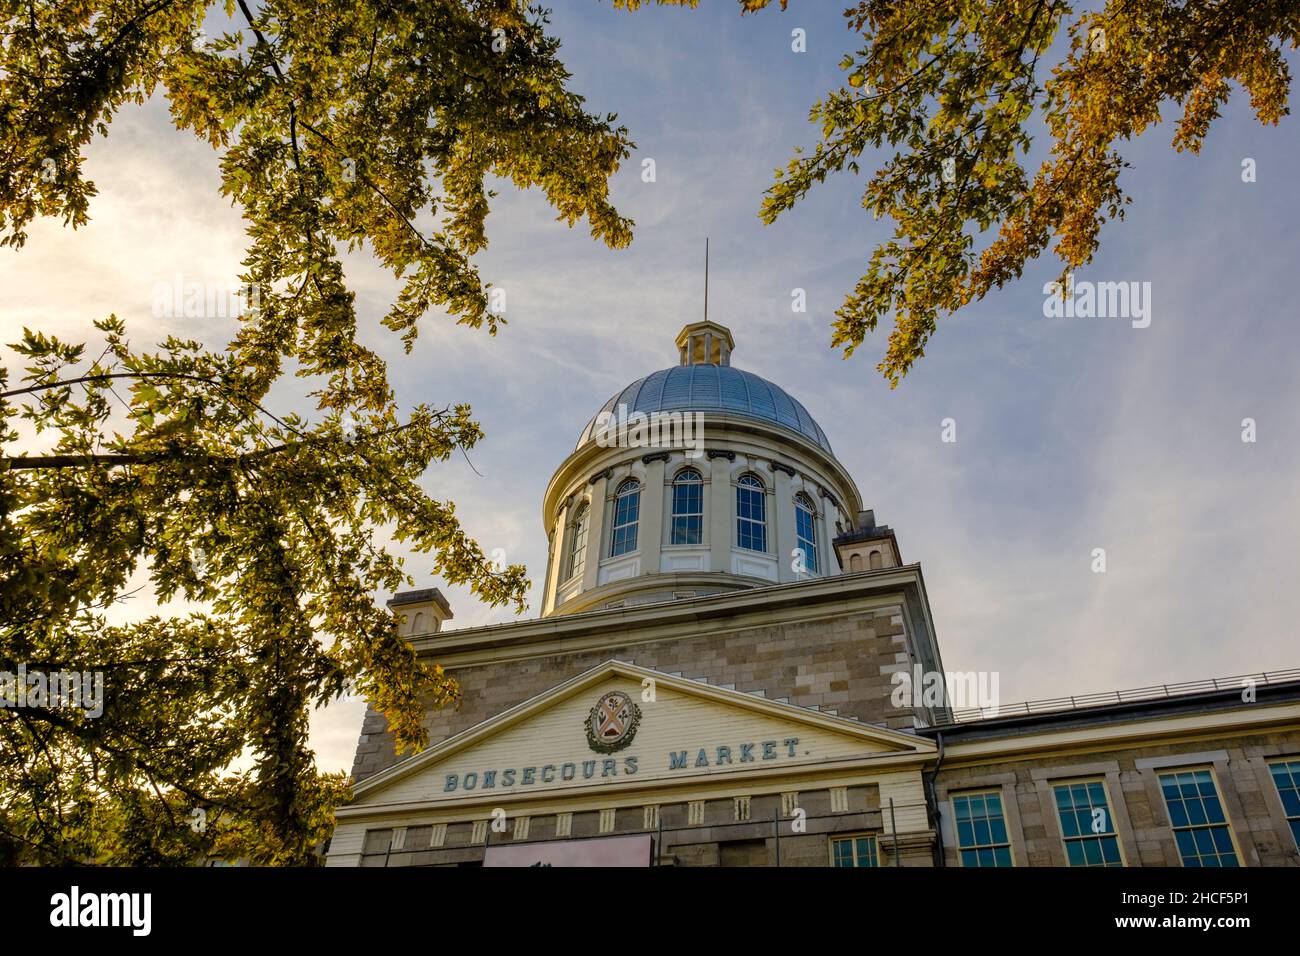 Kuppel und Fassade von Marché Bonsecours, Bonsecours Market, National Historic Site of Canada in the Fall, Vieux Montreal, Quebec, Kanada Stockfoto